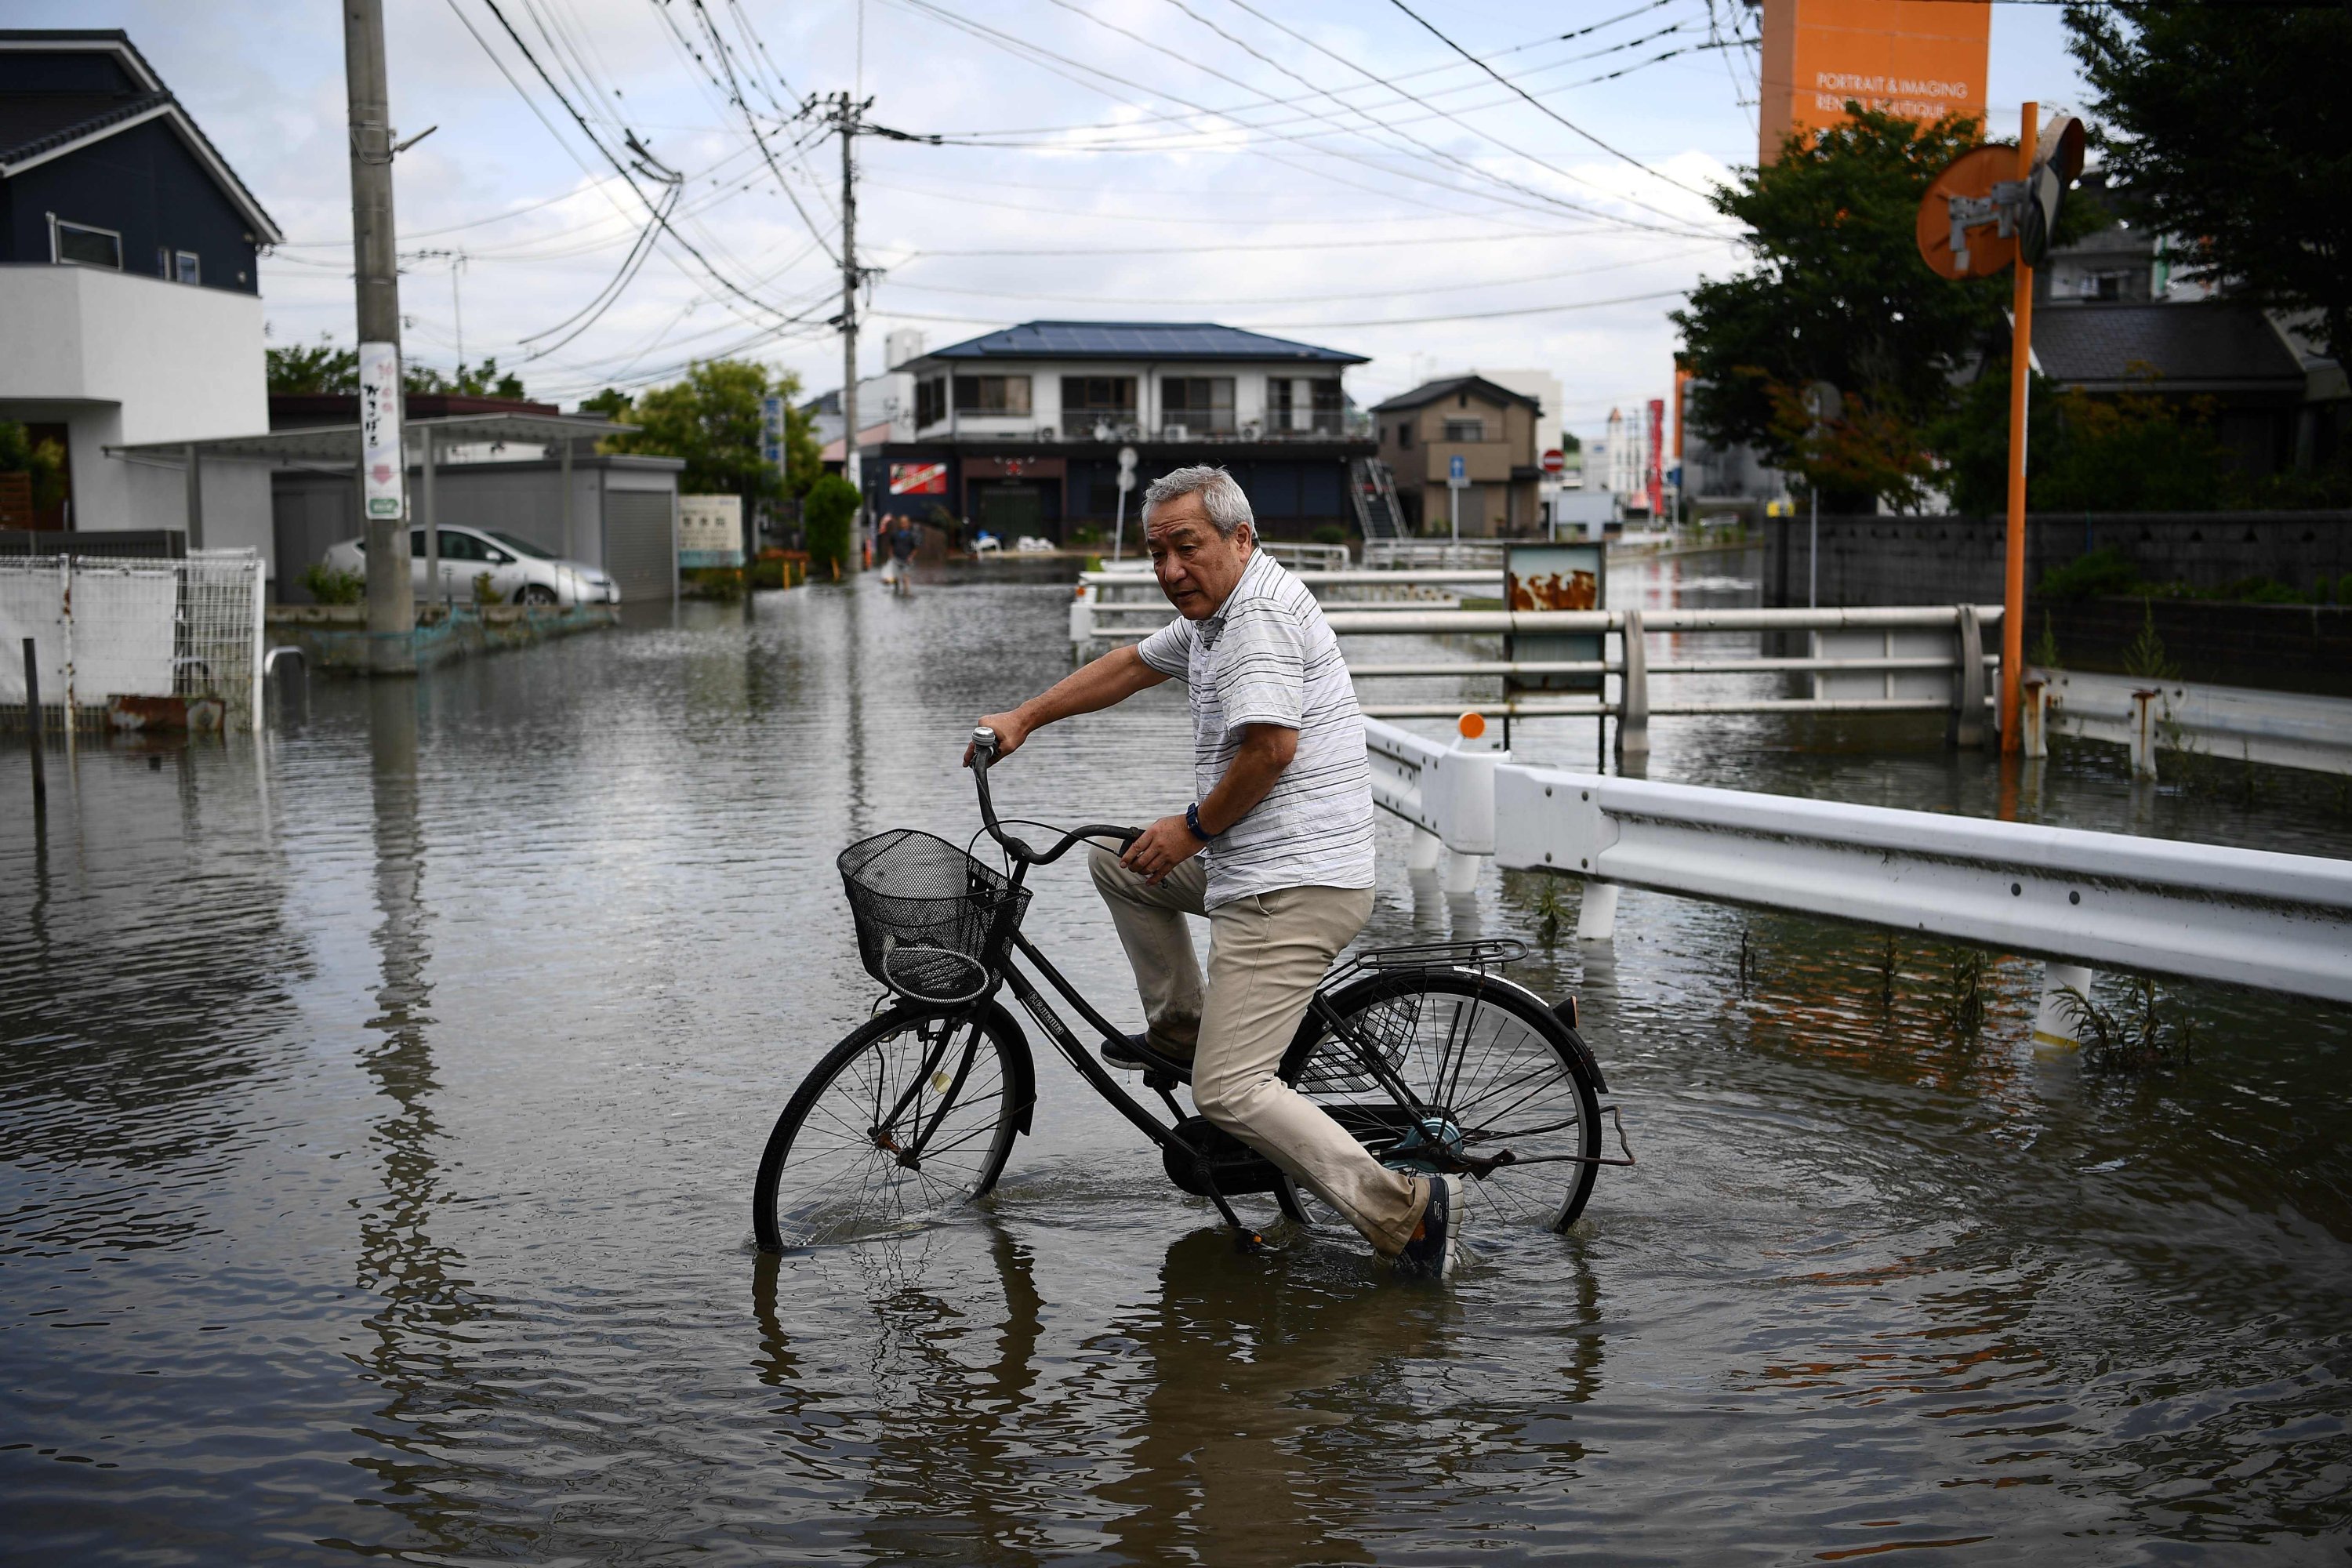 A man cycles through flood waters in Kurume, in Kumamoto Prefecture on July 8, 2020. (AFP Photo)